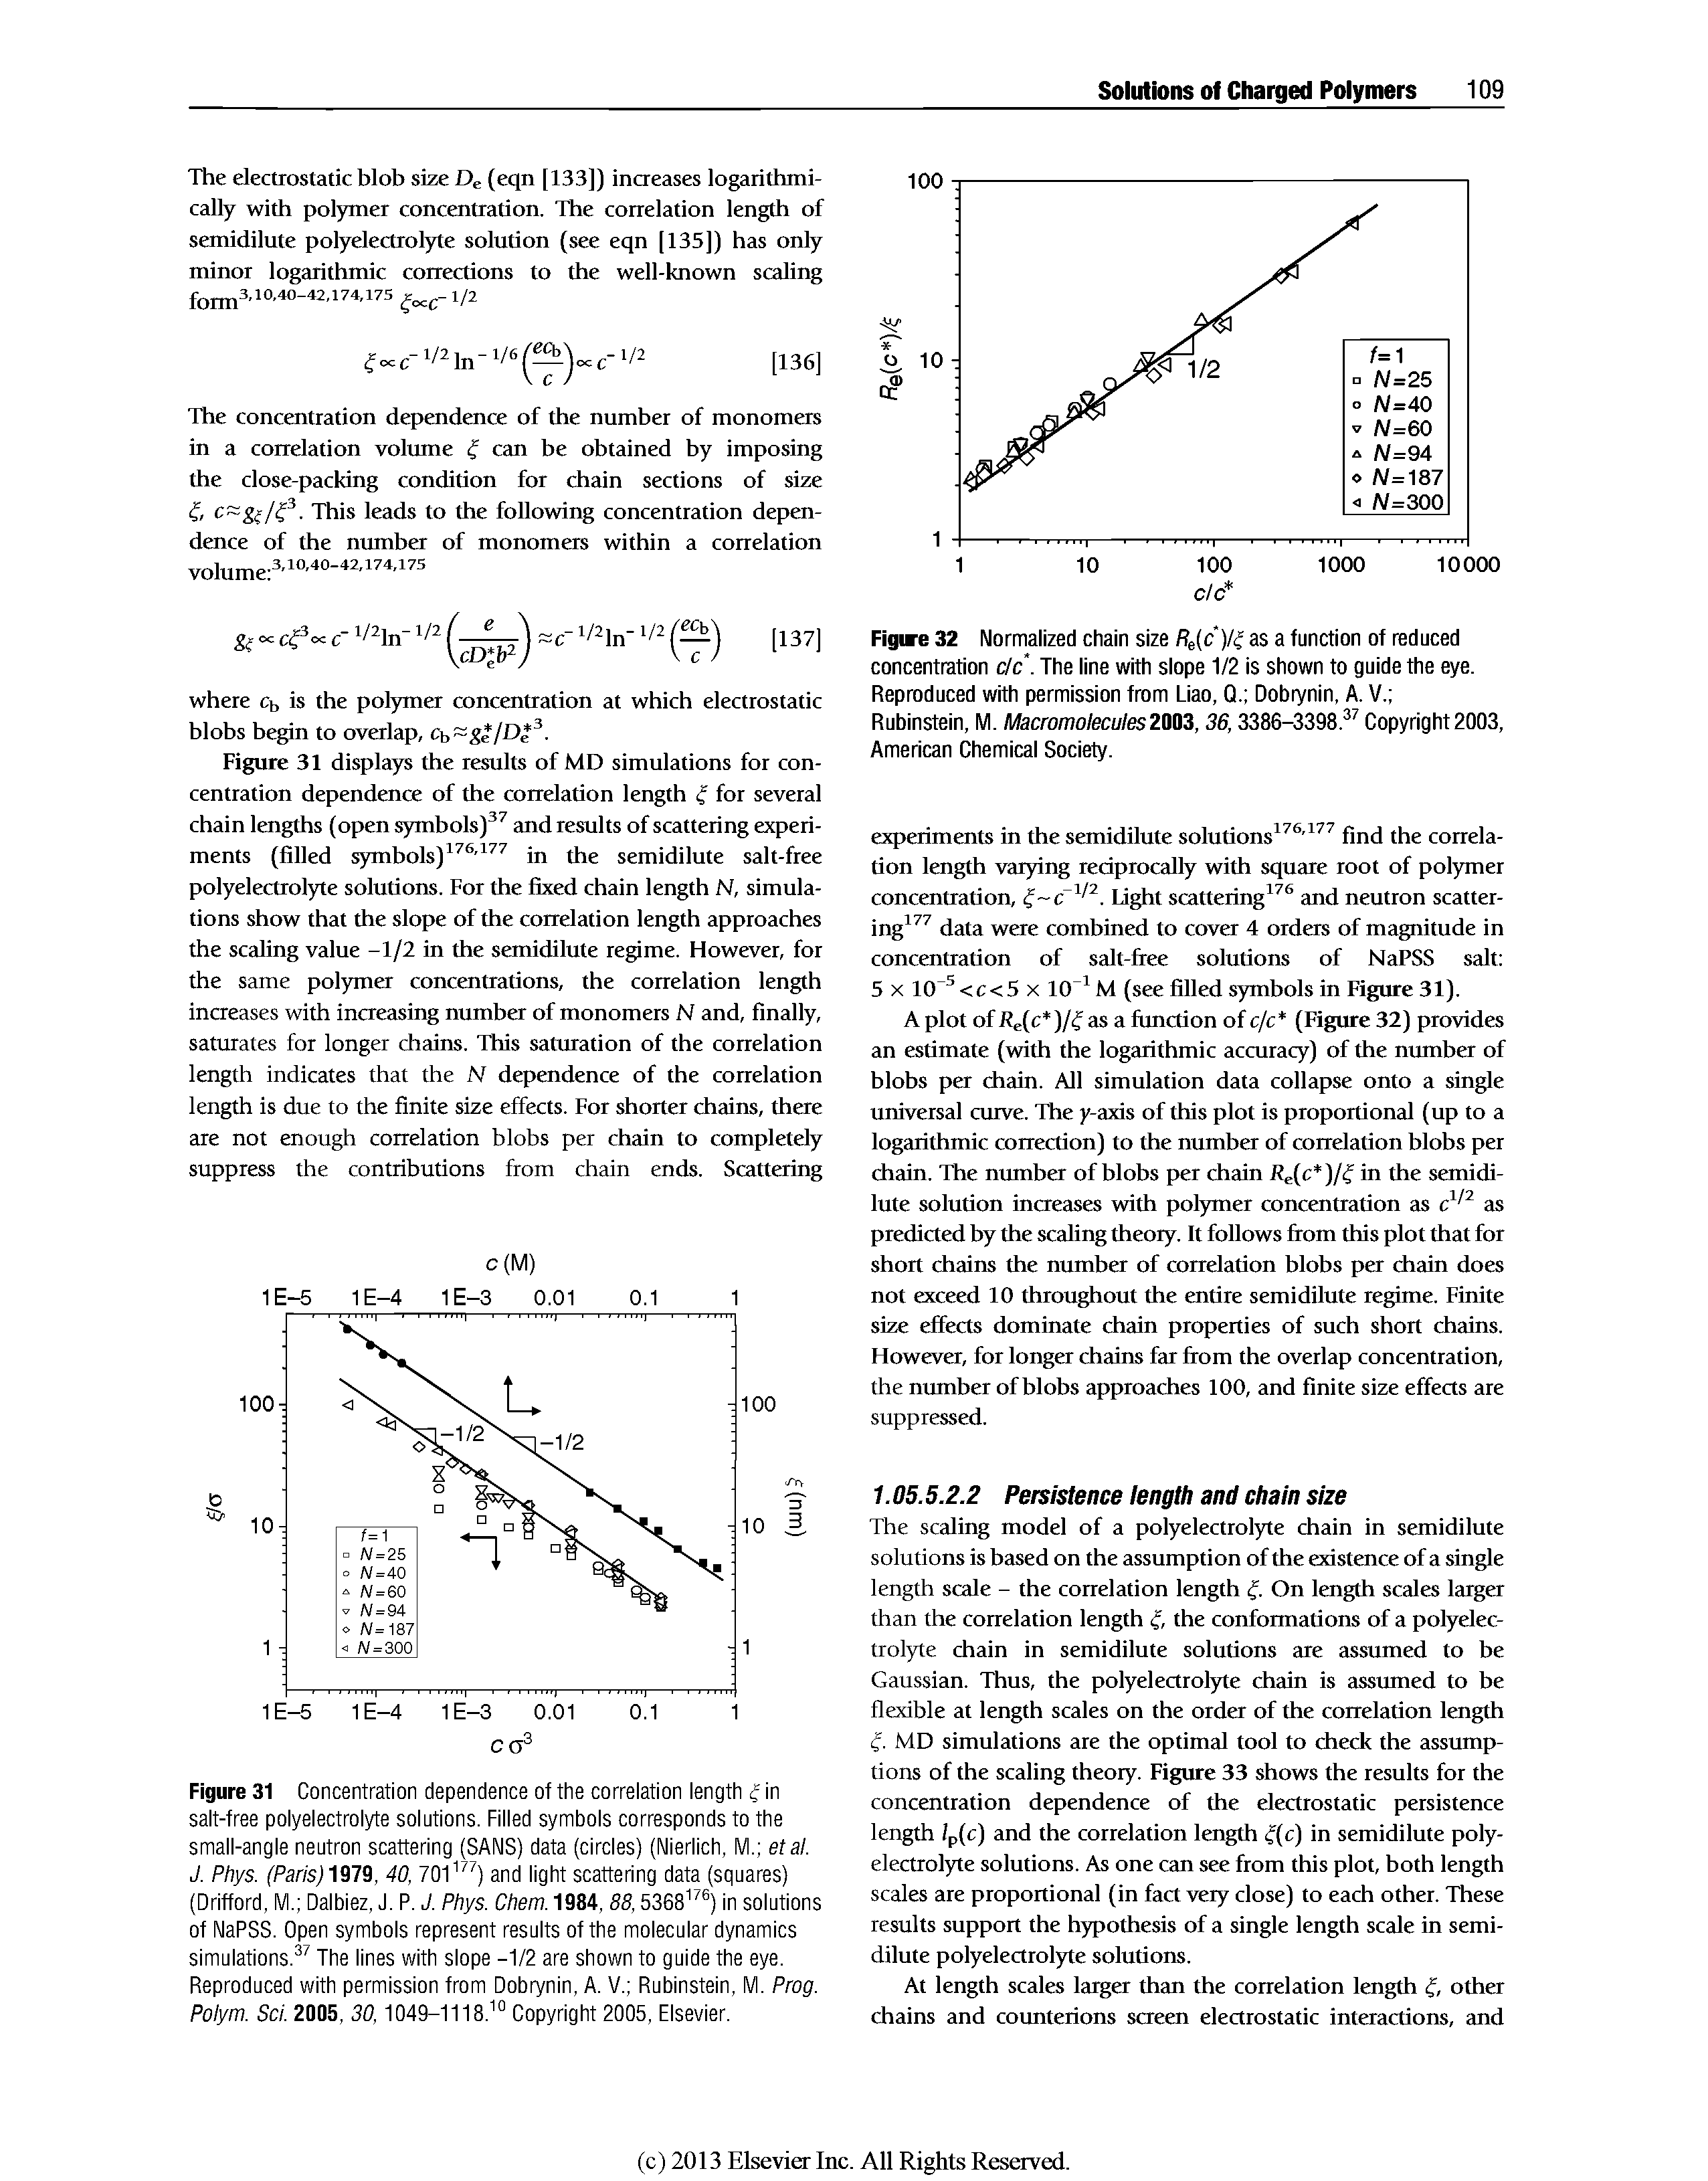 Figure 31 Concentration dependence of the correlation length (in salt-free polyelectrolyte solutions. Filled symbols corresponds to the small-angle neutron scattering (SANS) data (circles) (Nierlich, M. etal. J. Phys. (Paris) 1979, 40, 701 ) and light scattering data (squares) (Drifford, M. Dalbiez, J. P. J. Phys. Chem. 1984, 88,5368 ) in solutions of NaPSS. Open symbols represent results of the molecular dynamics simulations. The lines with slope -1/2 are shown to guide the eye. Reproduced with permission from Dobrynin, A. V. Rubinstein, M. Prog. Polym. Sci. 2005, 30,1049-1118. Copyright 2005, Elsevier.